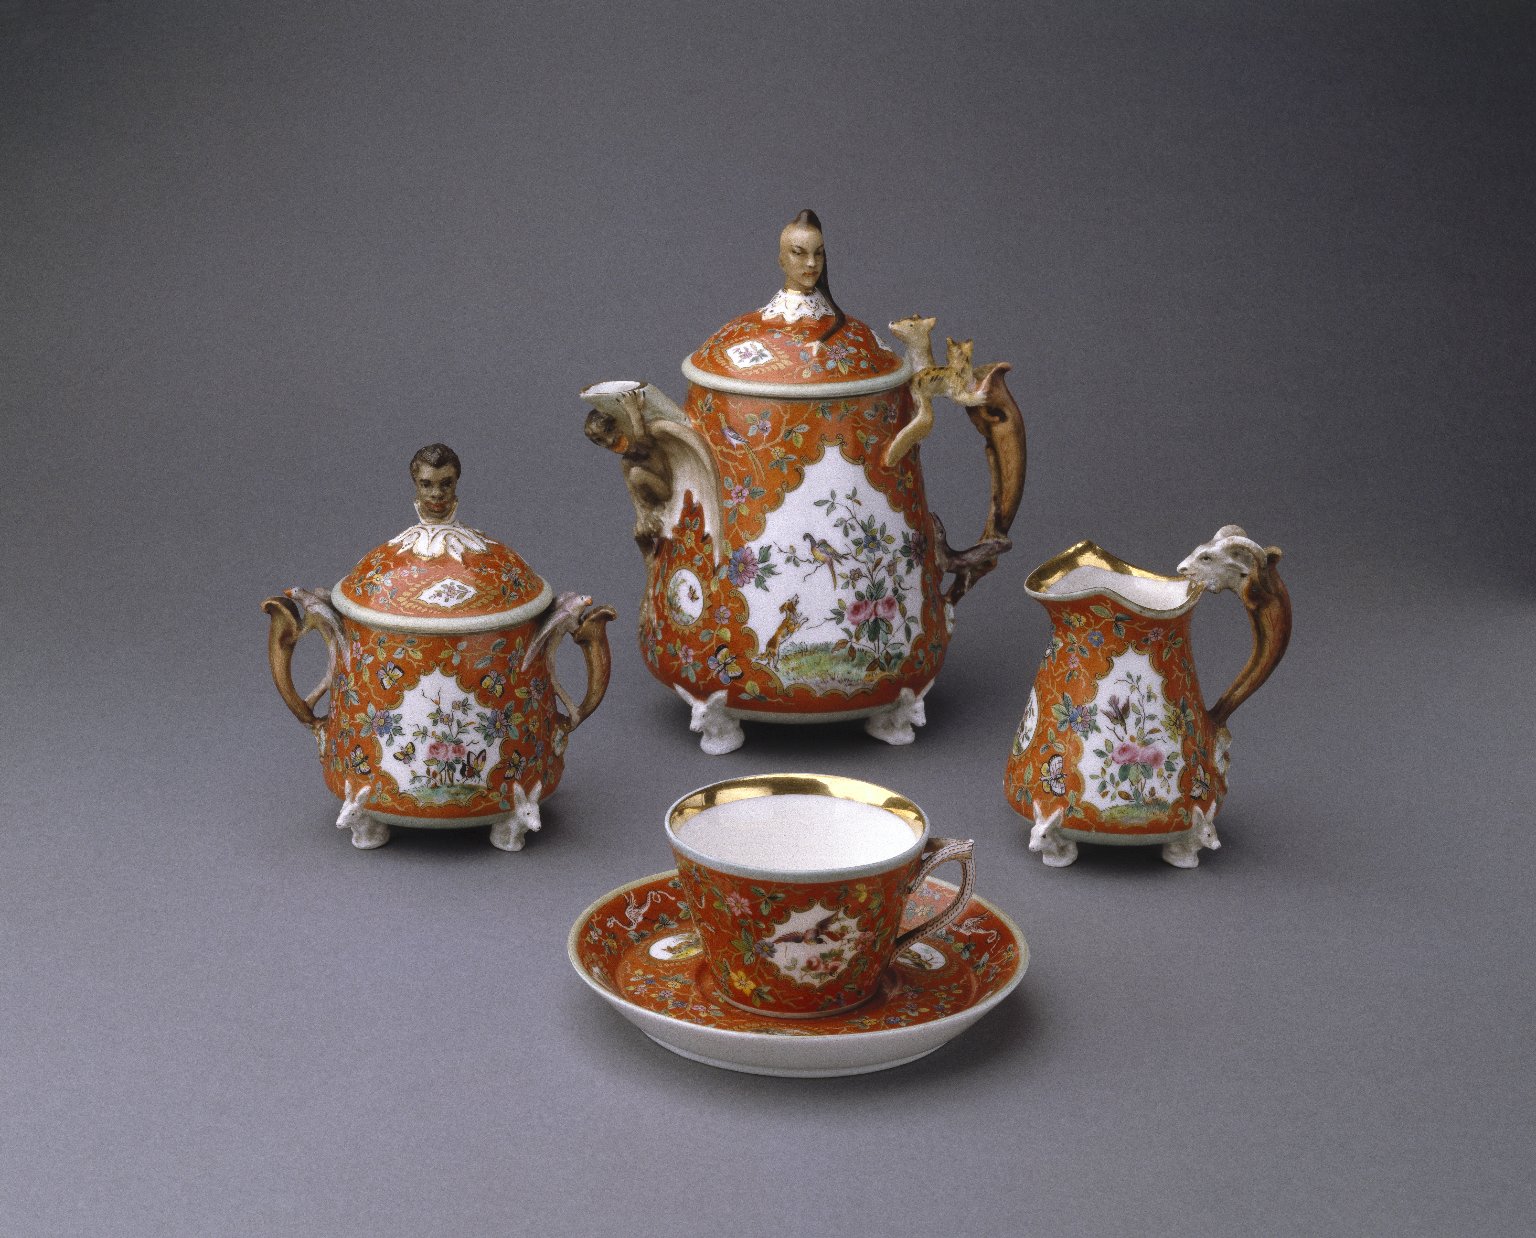 Sugar bowl and cover, by Karl L.H. Mueller, c. 1876. Brooklyn Museum, Gift of Franklin Chace.